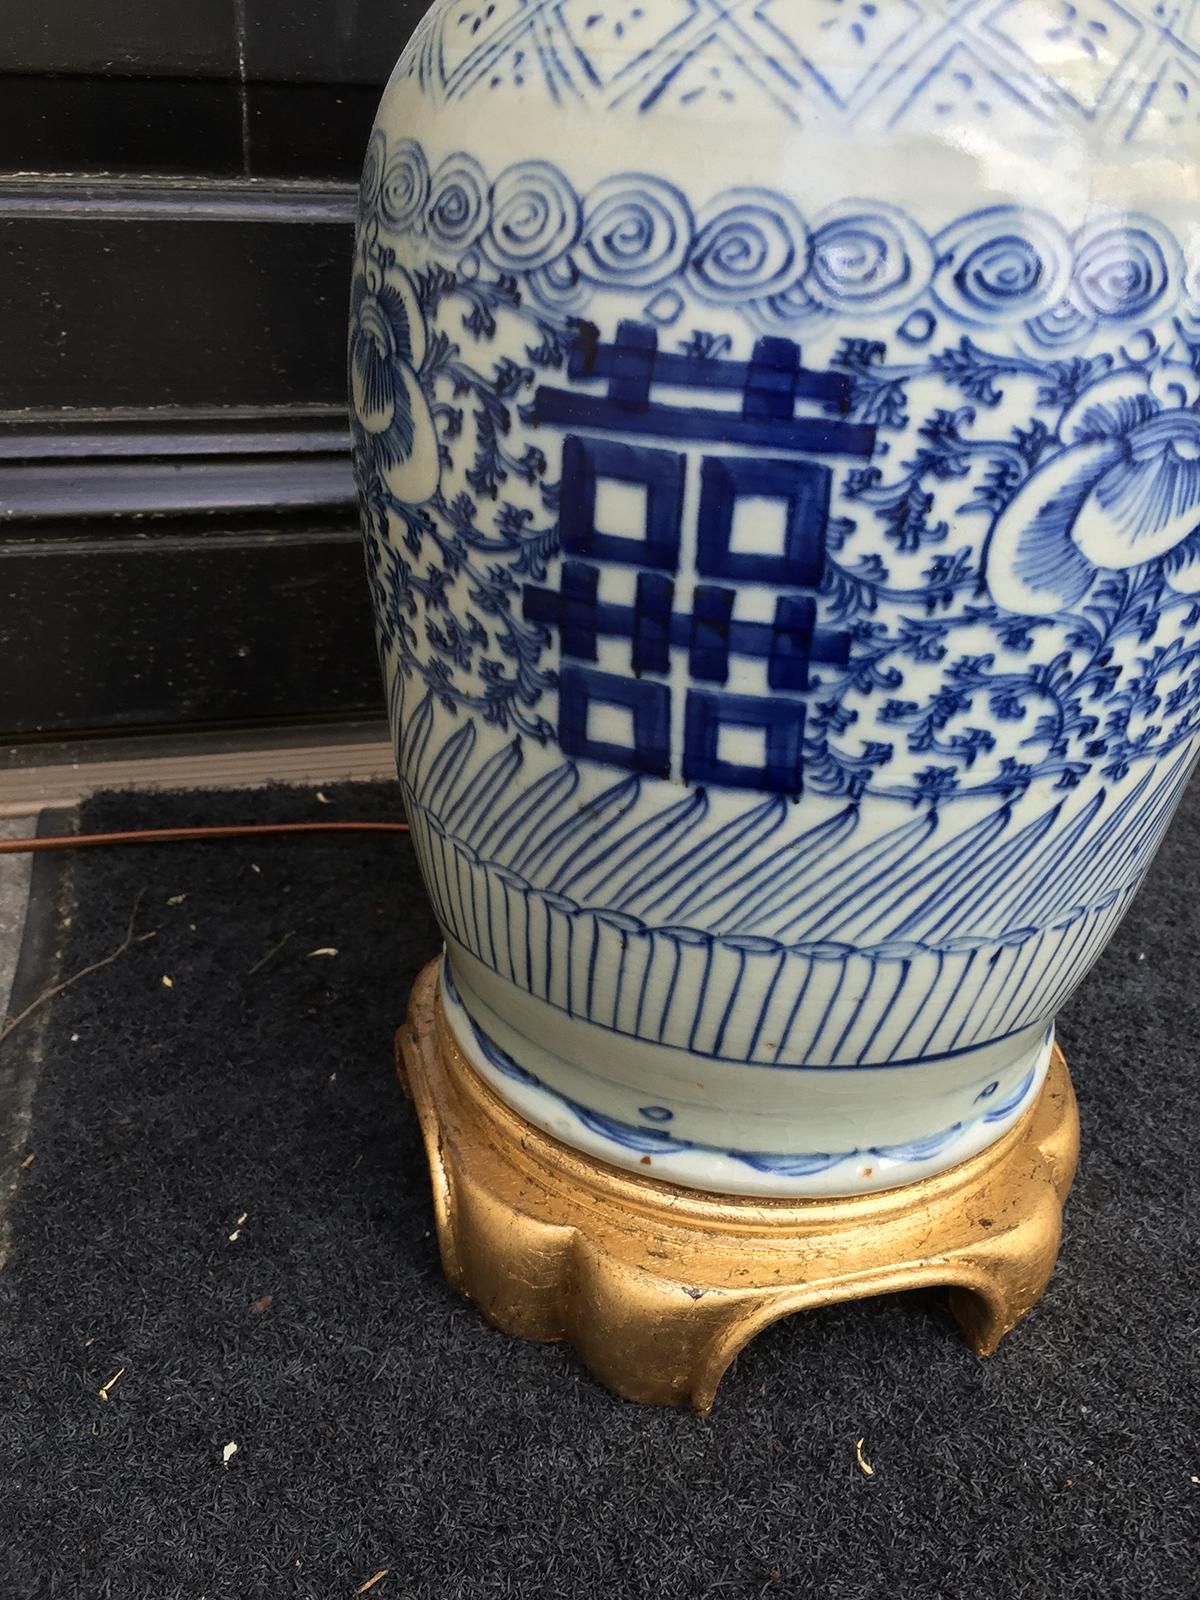 19th-20th Century Chinese Export Blue & White Double Happiness Porcelain Lamp In Good Condition For Sale In Atlanta, GA